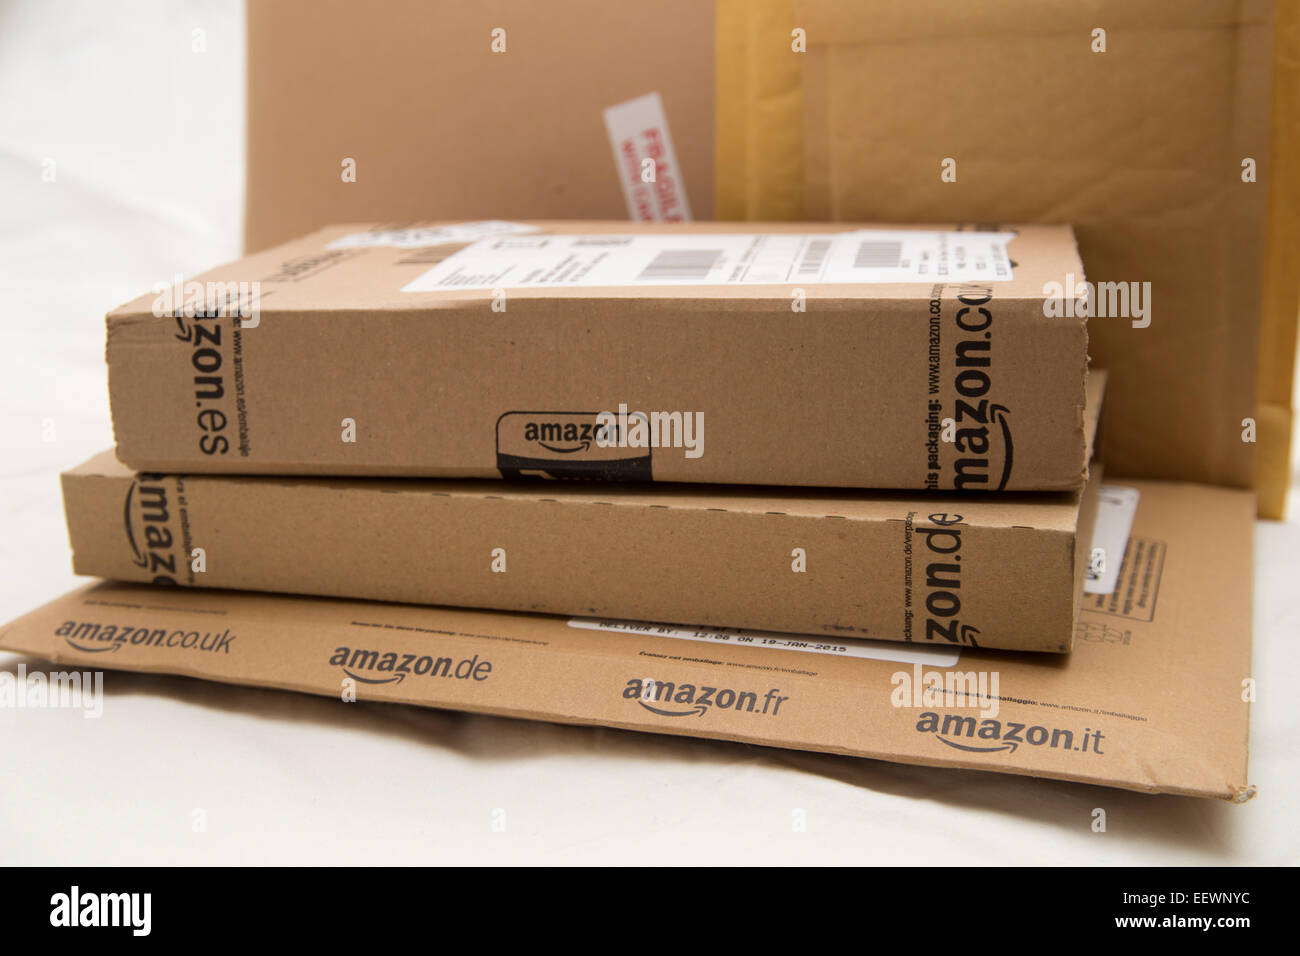 Amazon parcels, packets, post, online shopping Stock Photo - Alamy